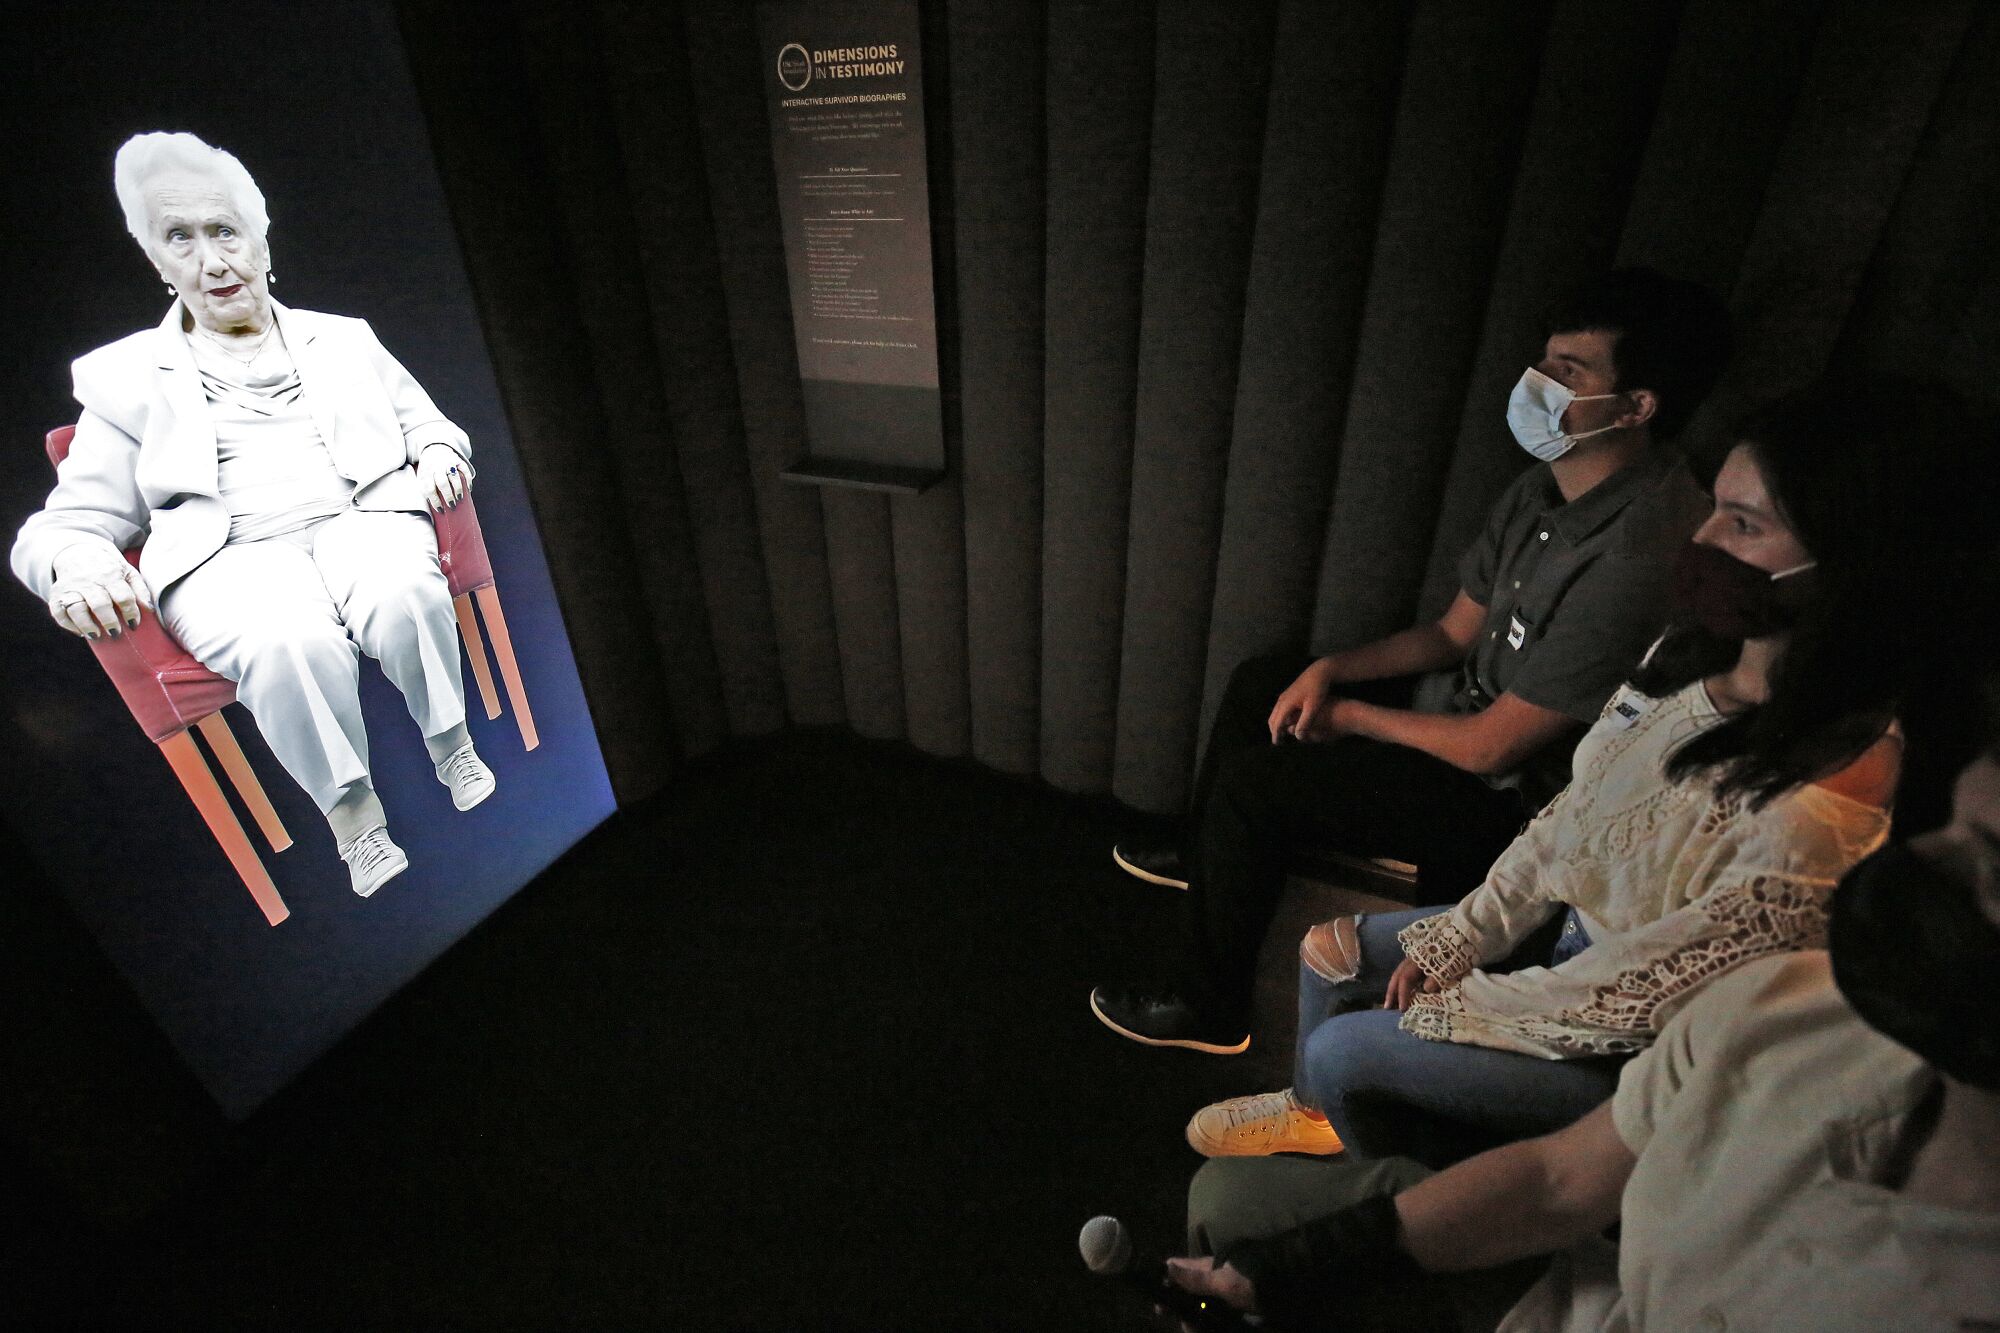 Students virtually interact with a holographic image of 97-year-old Holocaust survivor Renee Firestone.